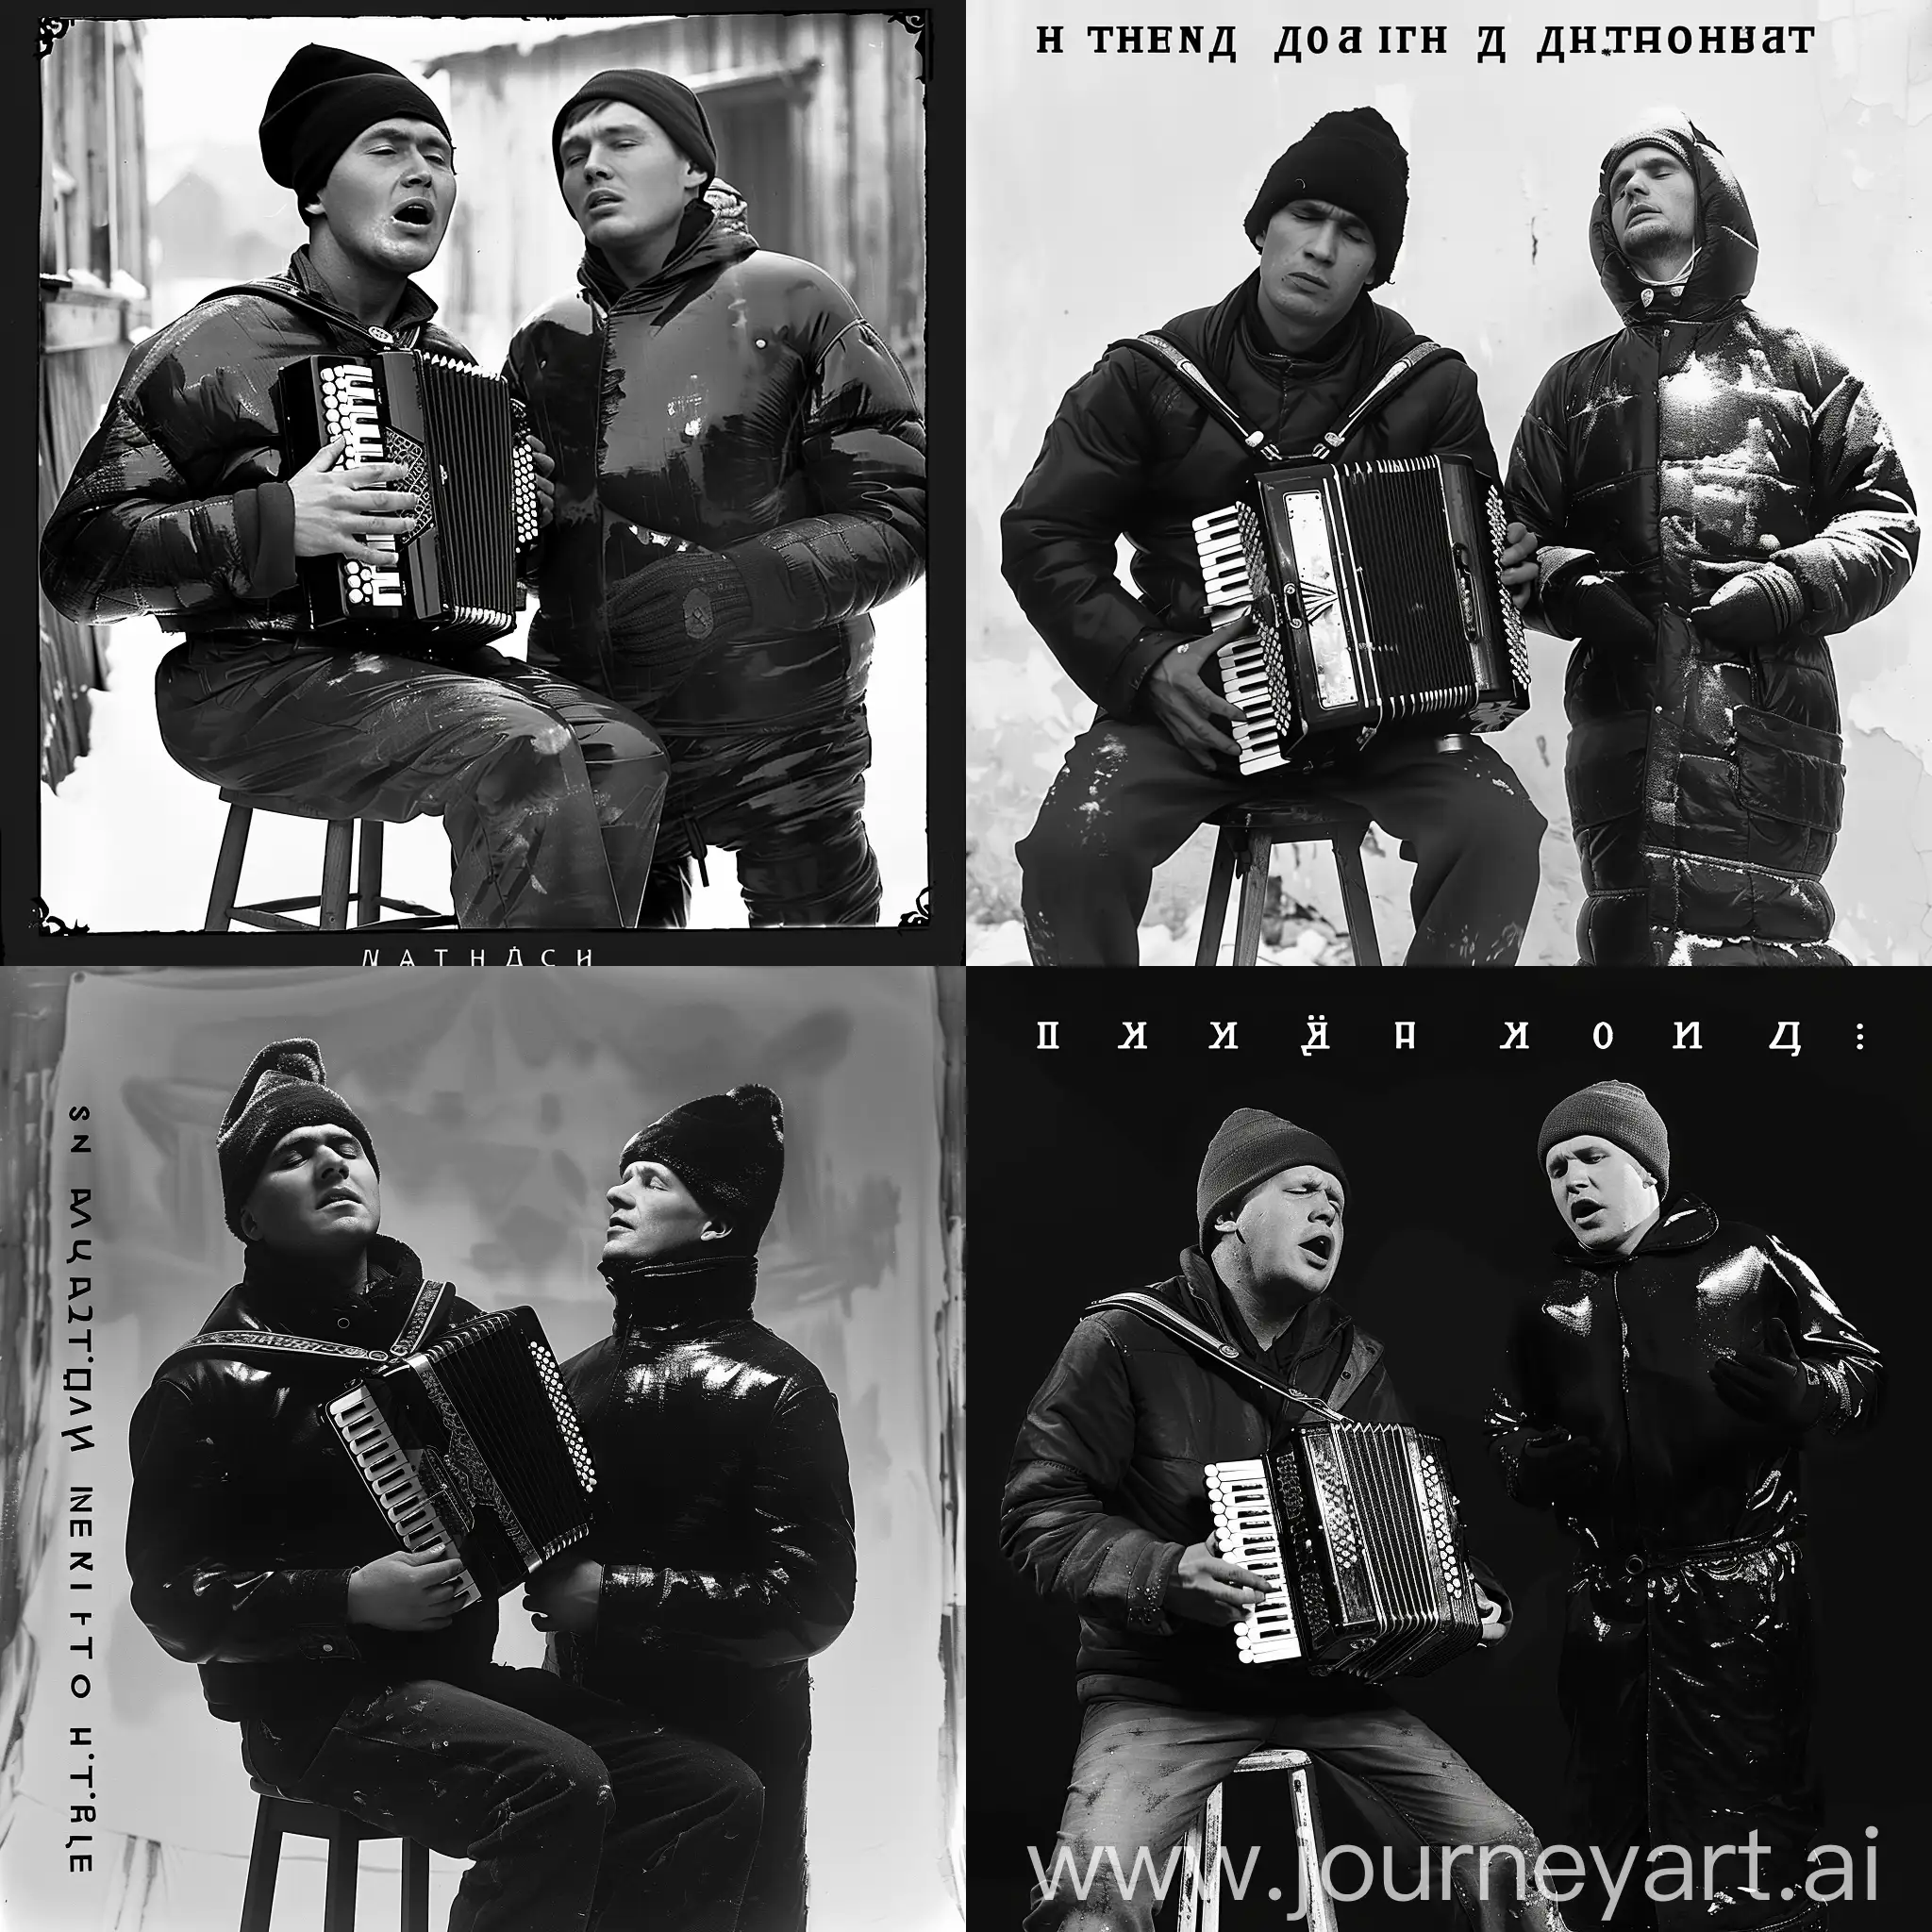 Two-Men-in-Ushanka-Hats-Playing-Accordion-and-Singing-in-Traditional-Russian-Attire